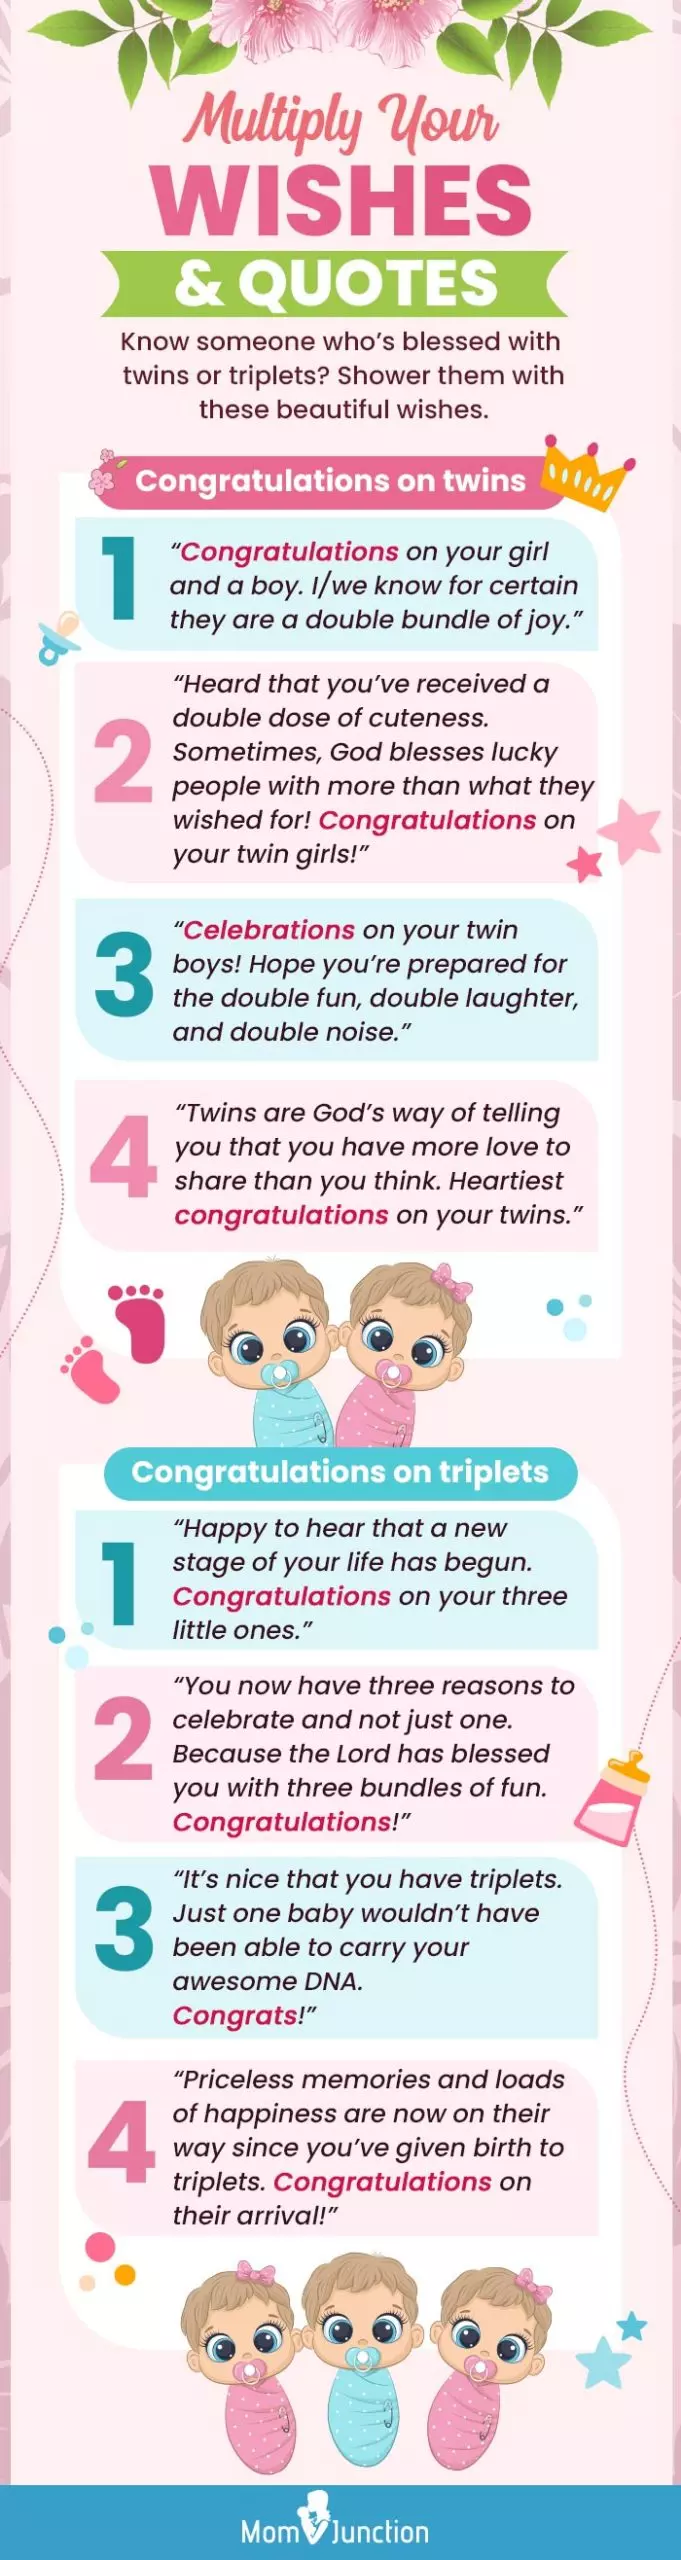 newborn wishes for twins and triplets (infographic)